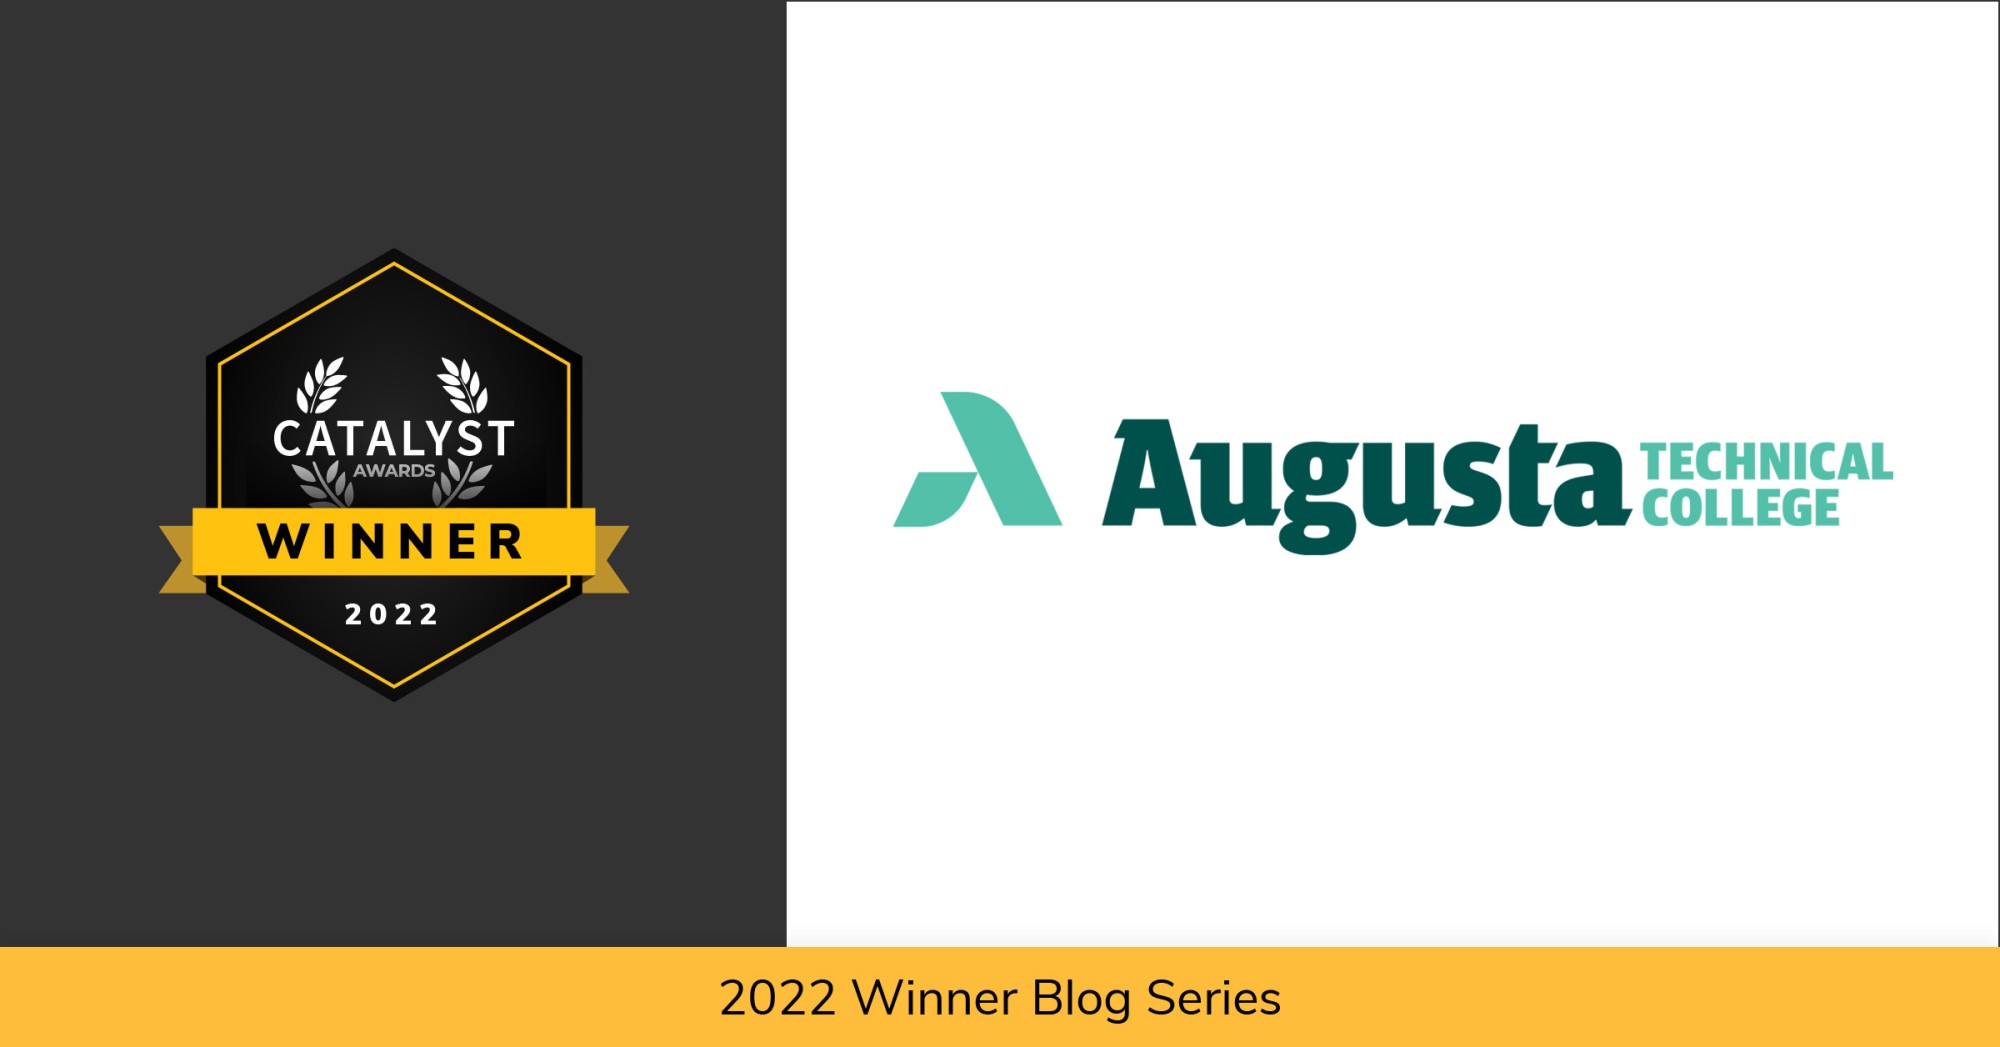 Anthology Catalyst Award Winner logo locked up with the Augusta Technical College logo over the text 2022 Winner Blog Series